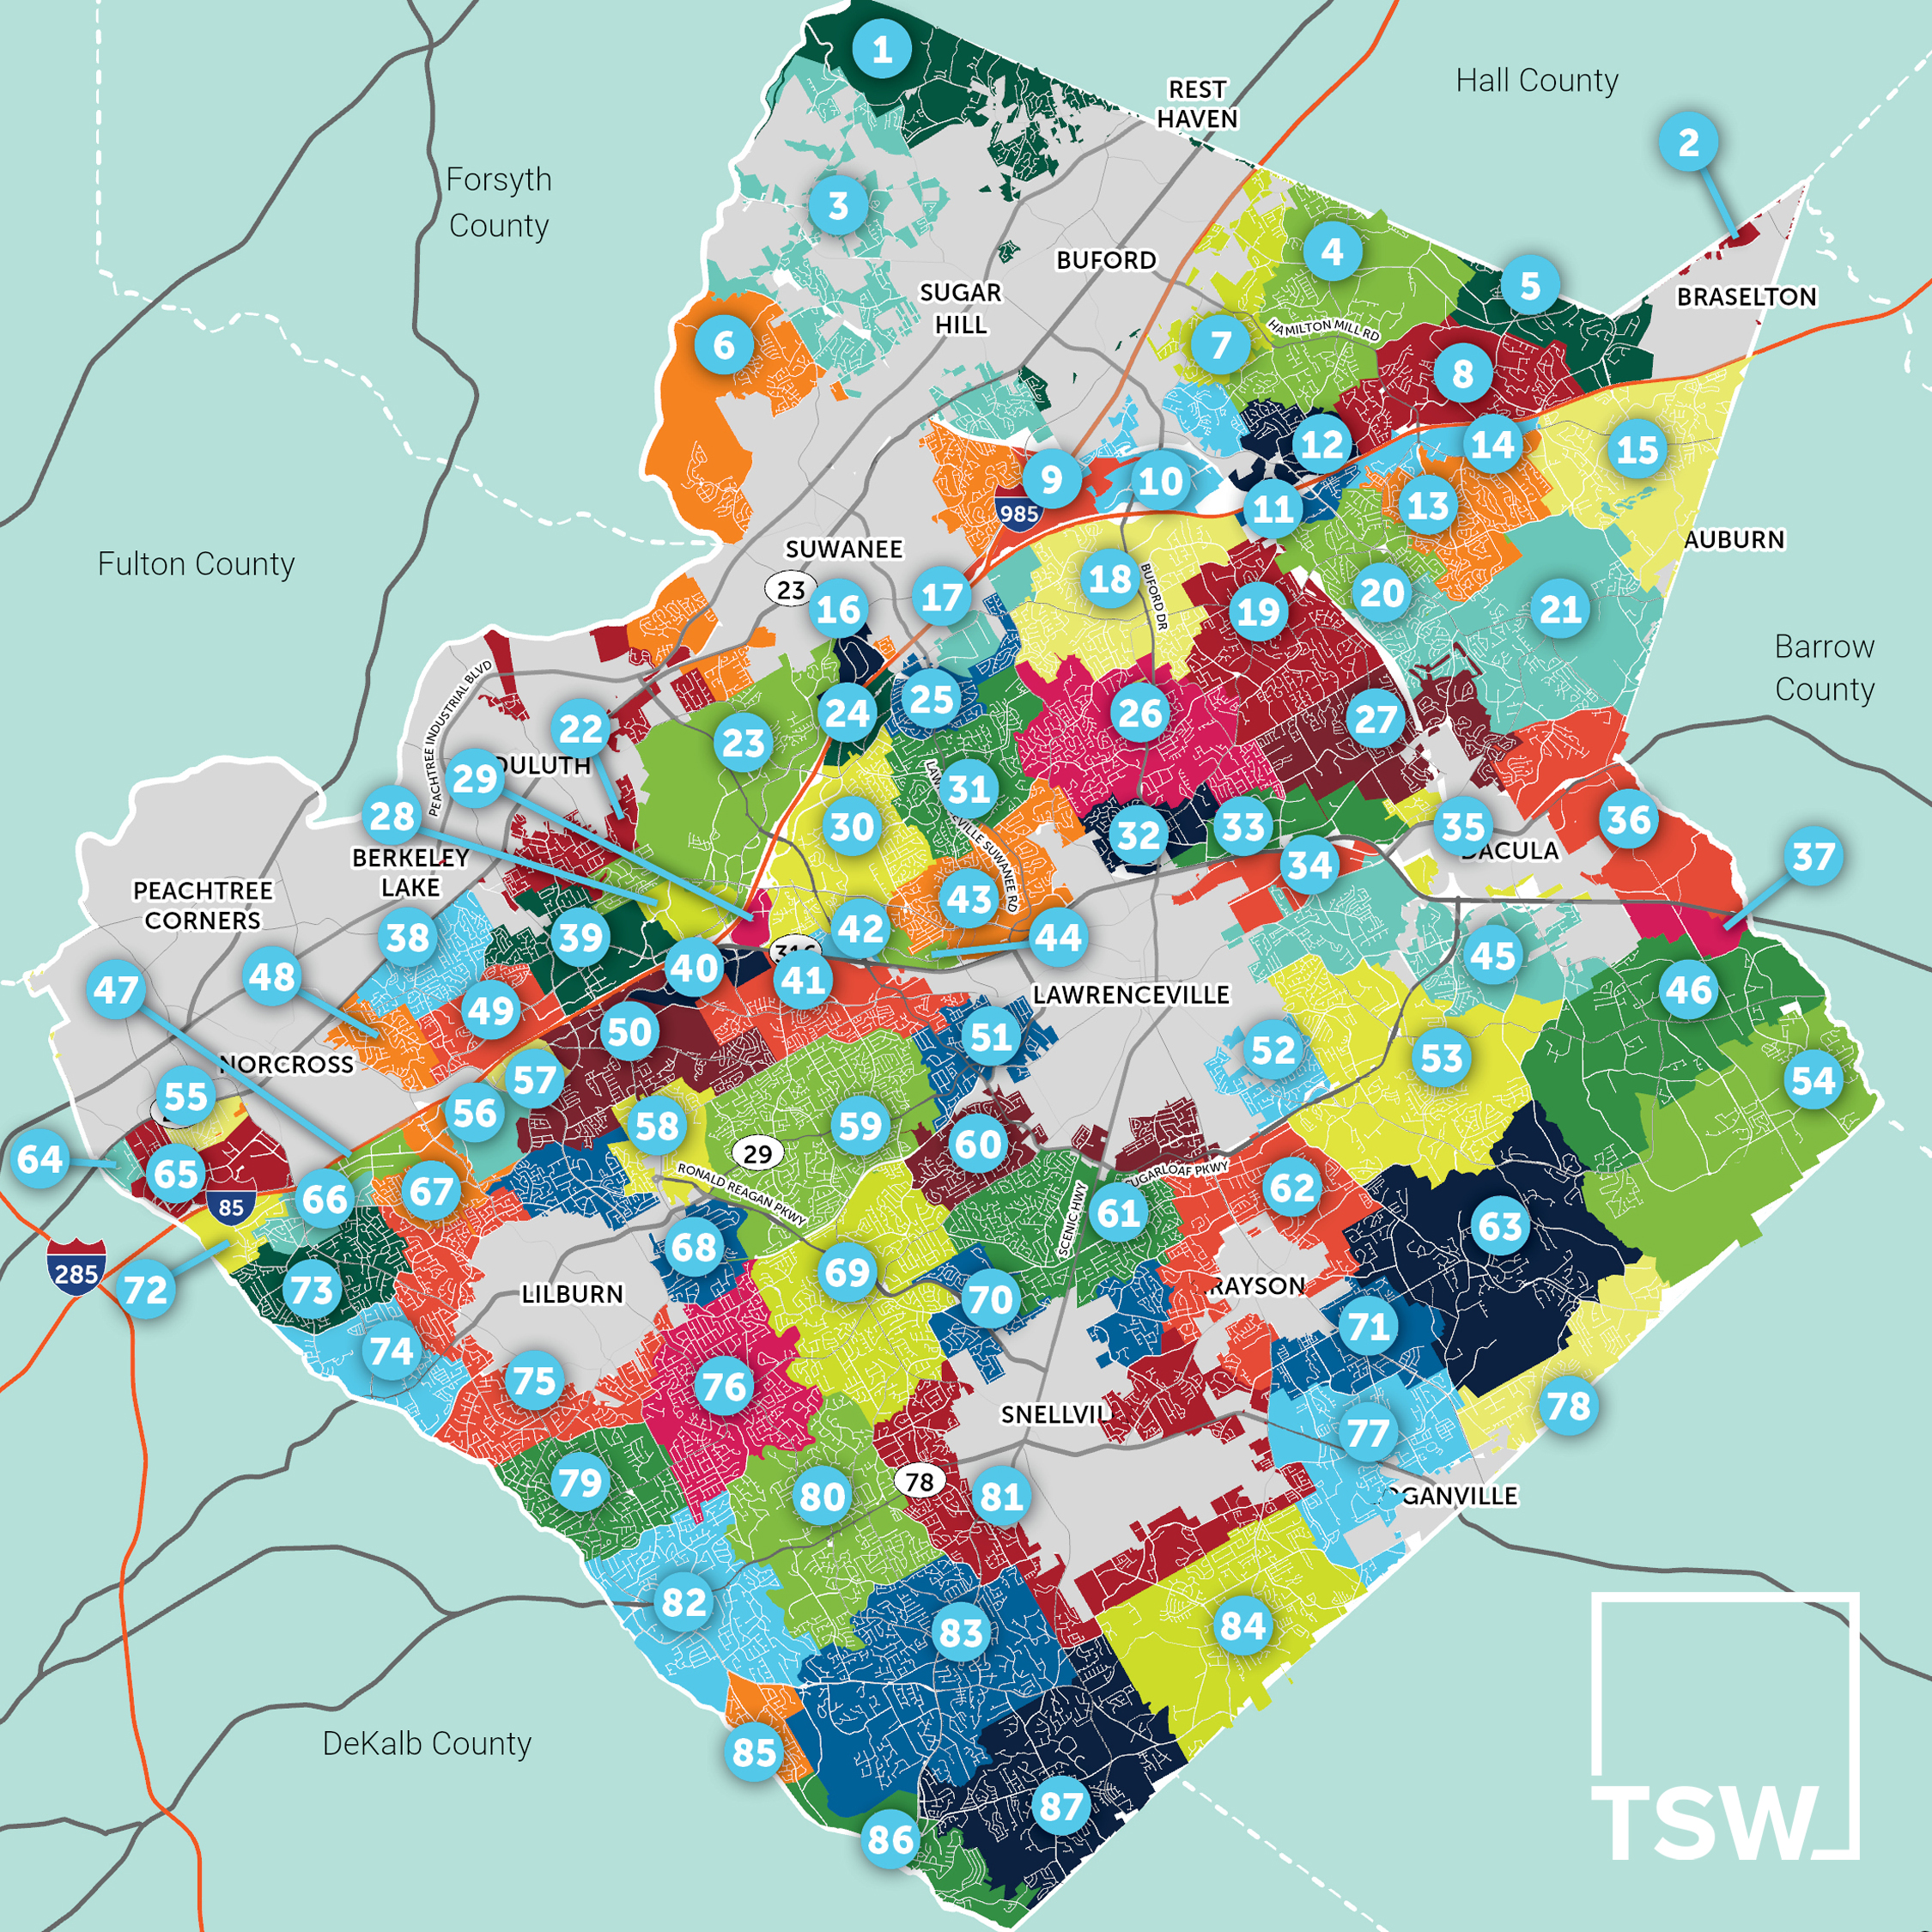 2045 Gwinnett County Unified Plan Recap - A map of the communities within the study area.